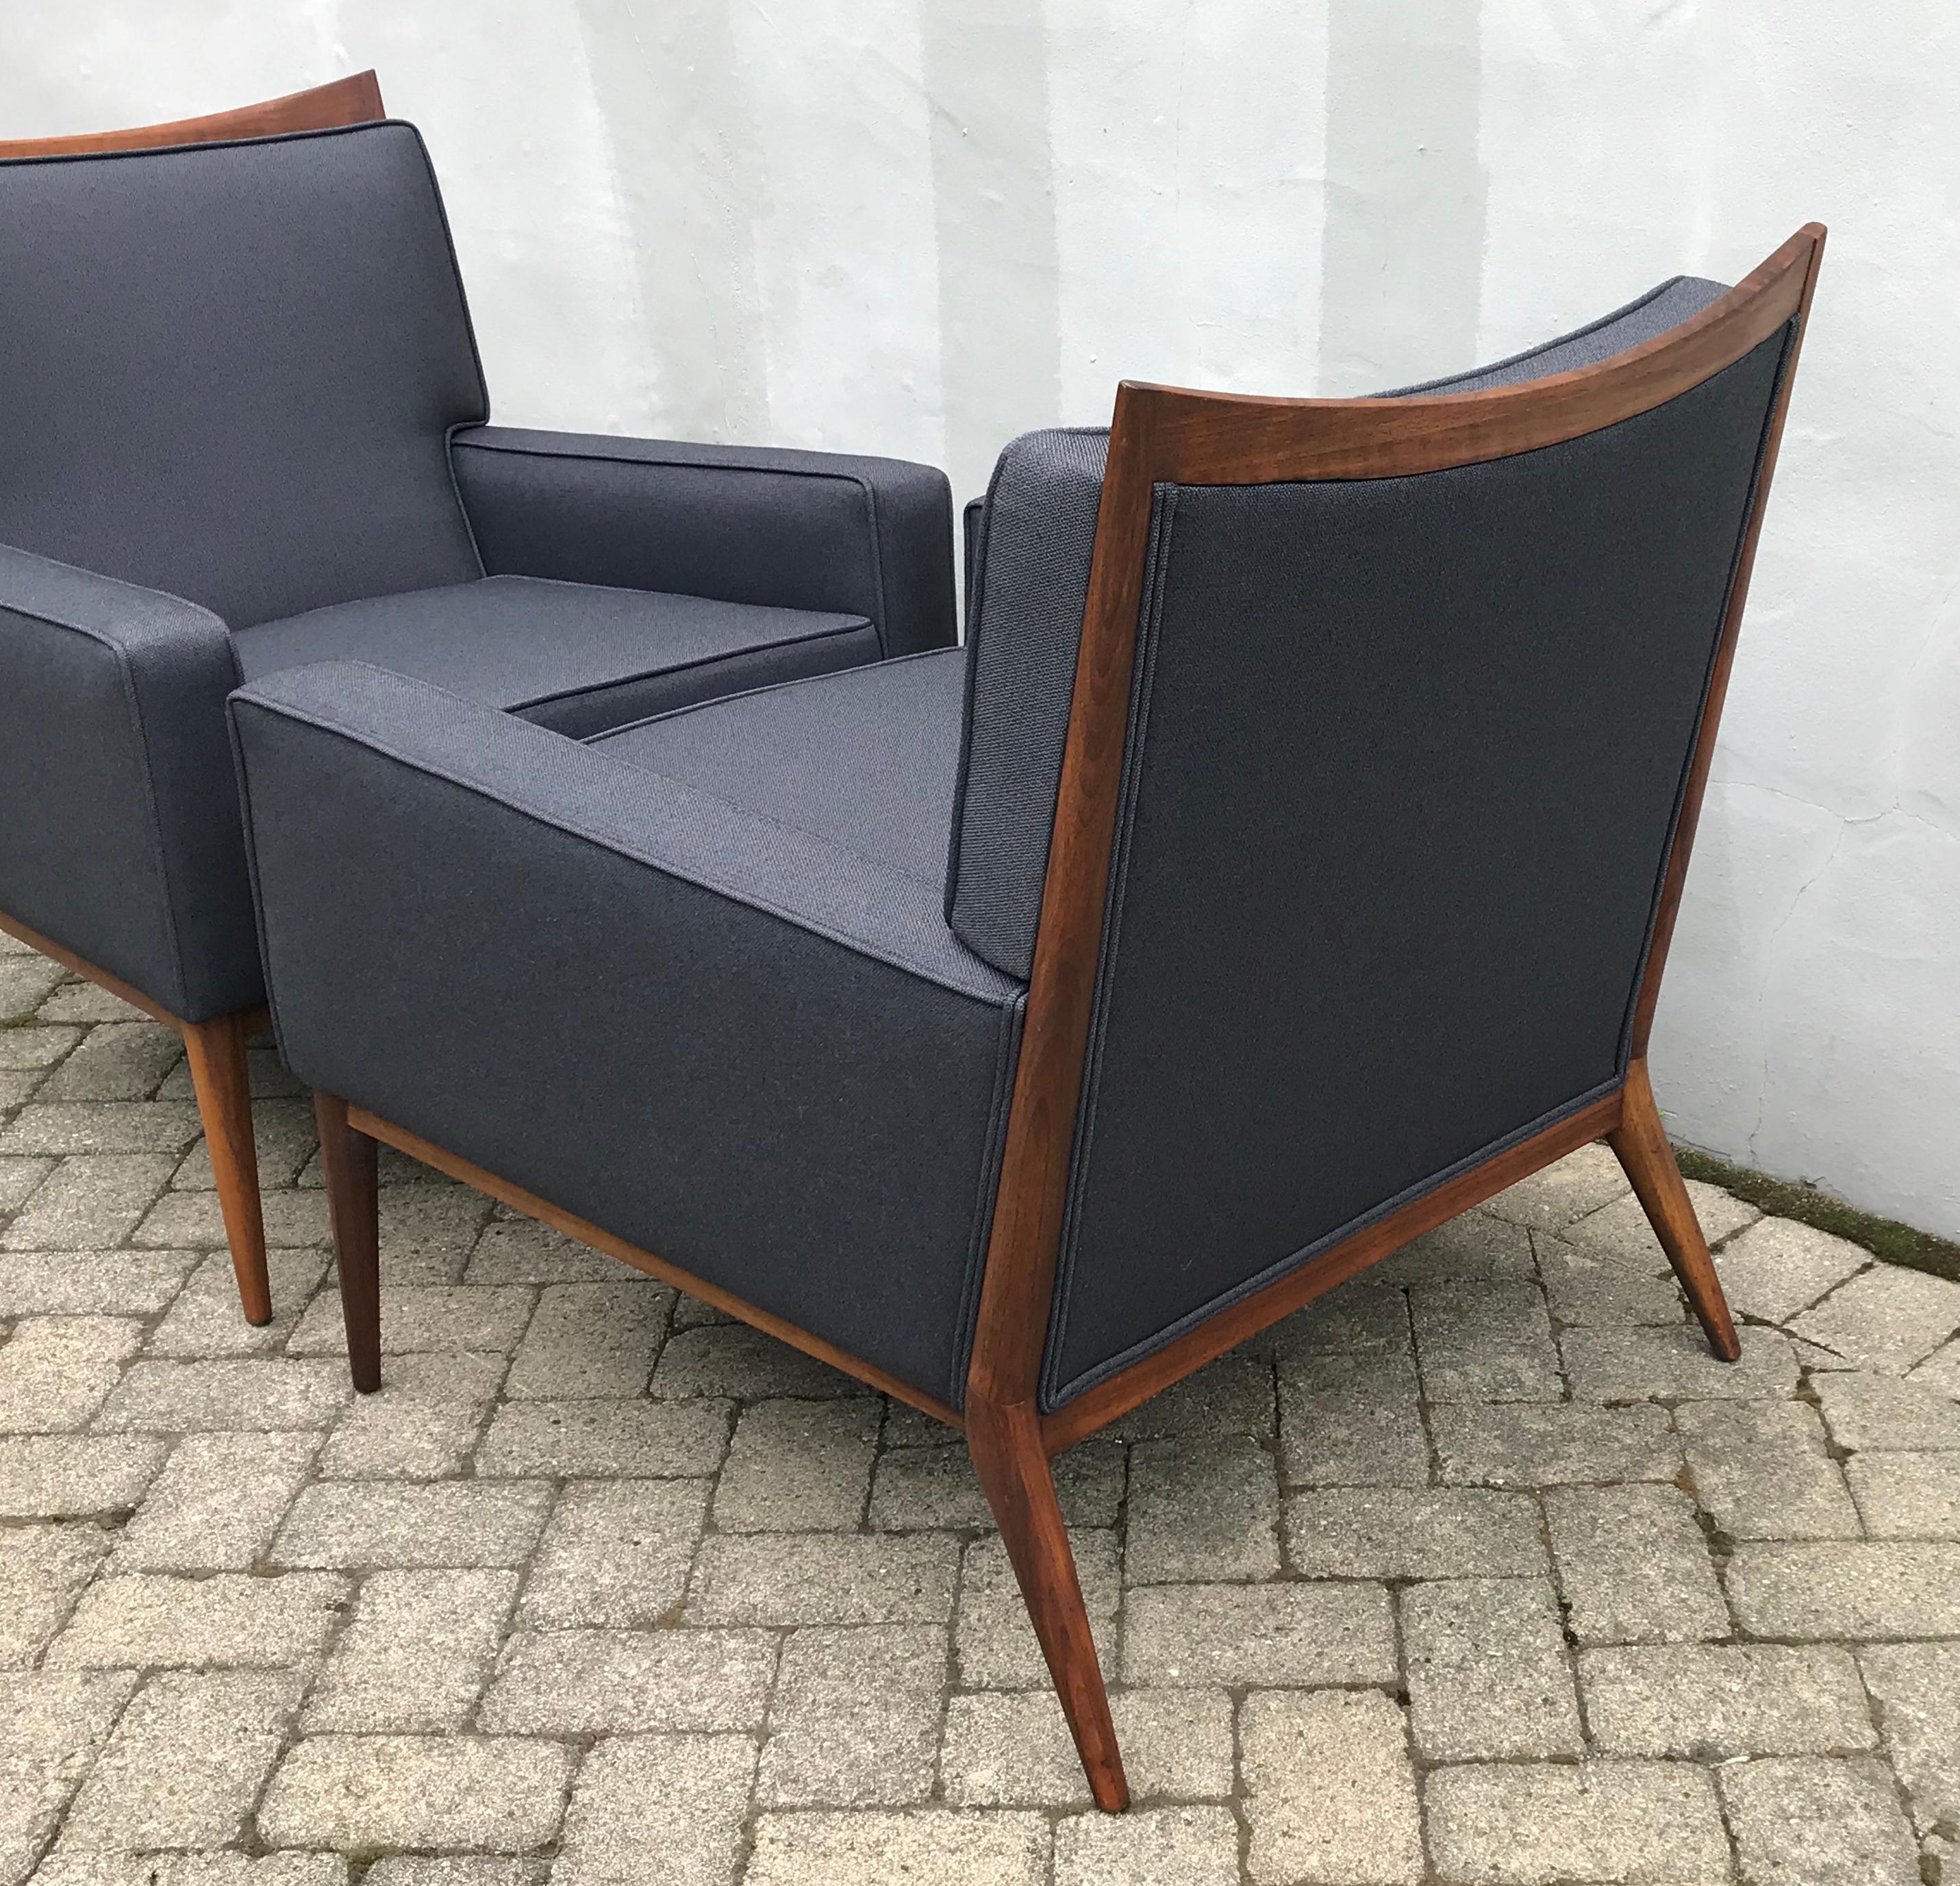 Fabric Pair of Slate Grey Paul McCobb Lounge Club Chairs for Directional, 1950's